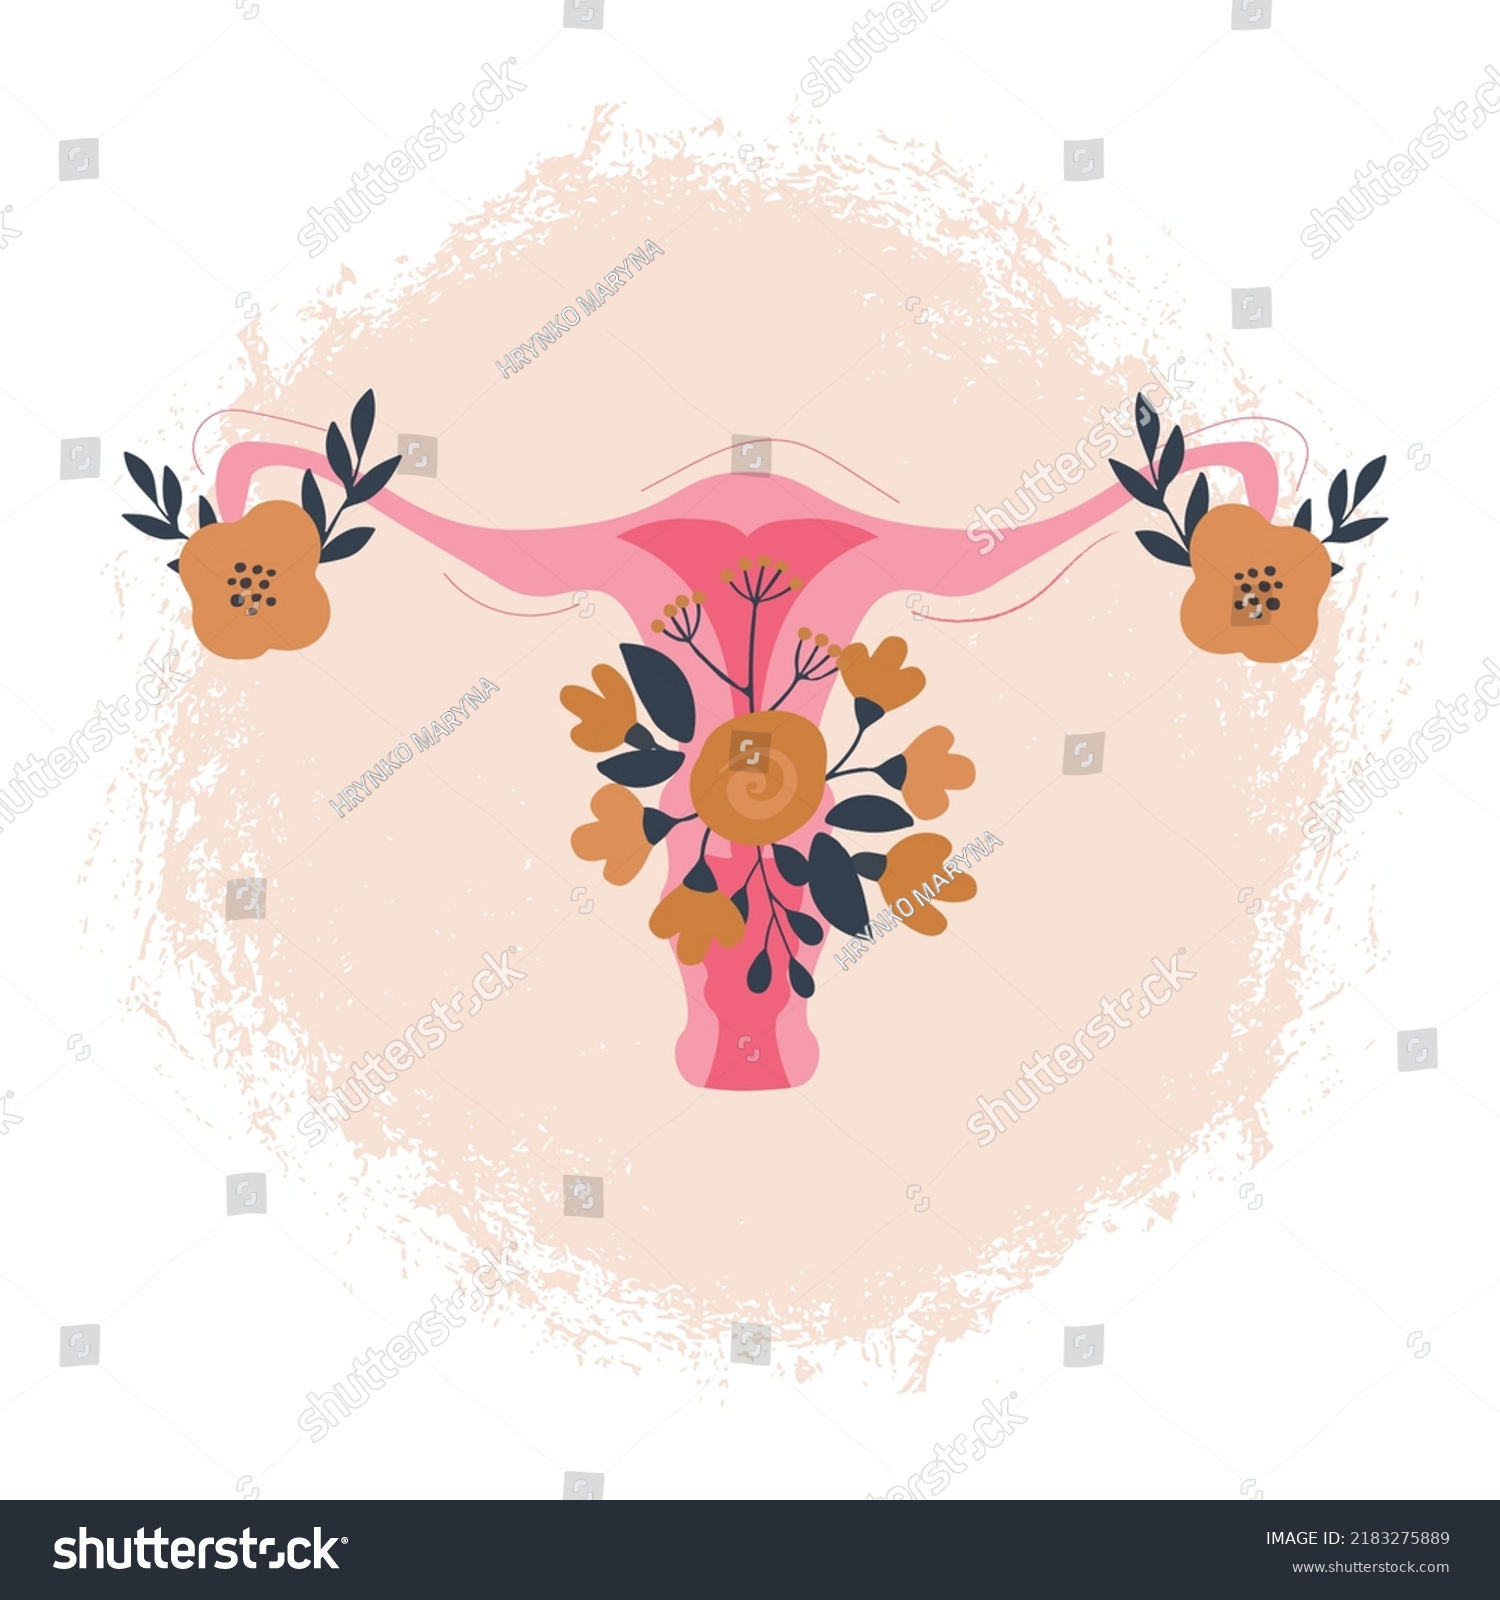 Female Reproductive System Flowers Feminine Gynecology Stock Vector Royalty Free 2183275889 0054